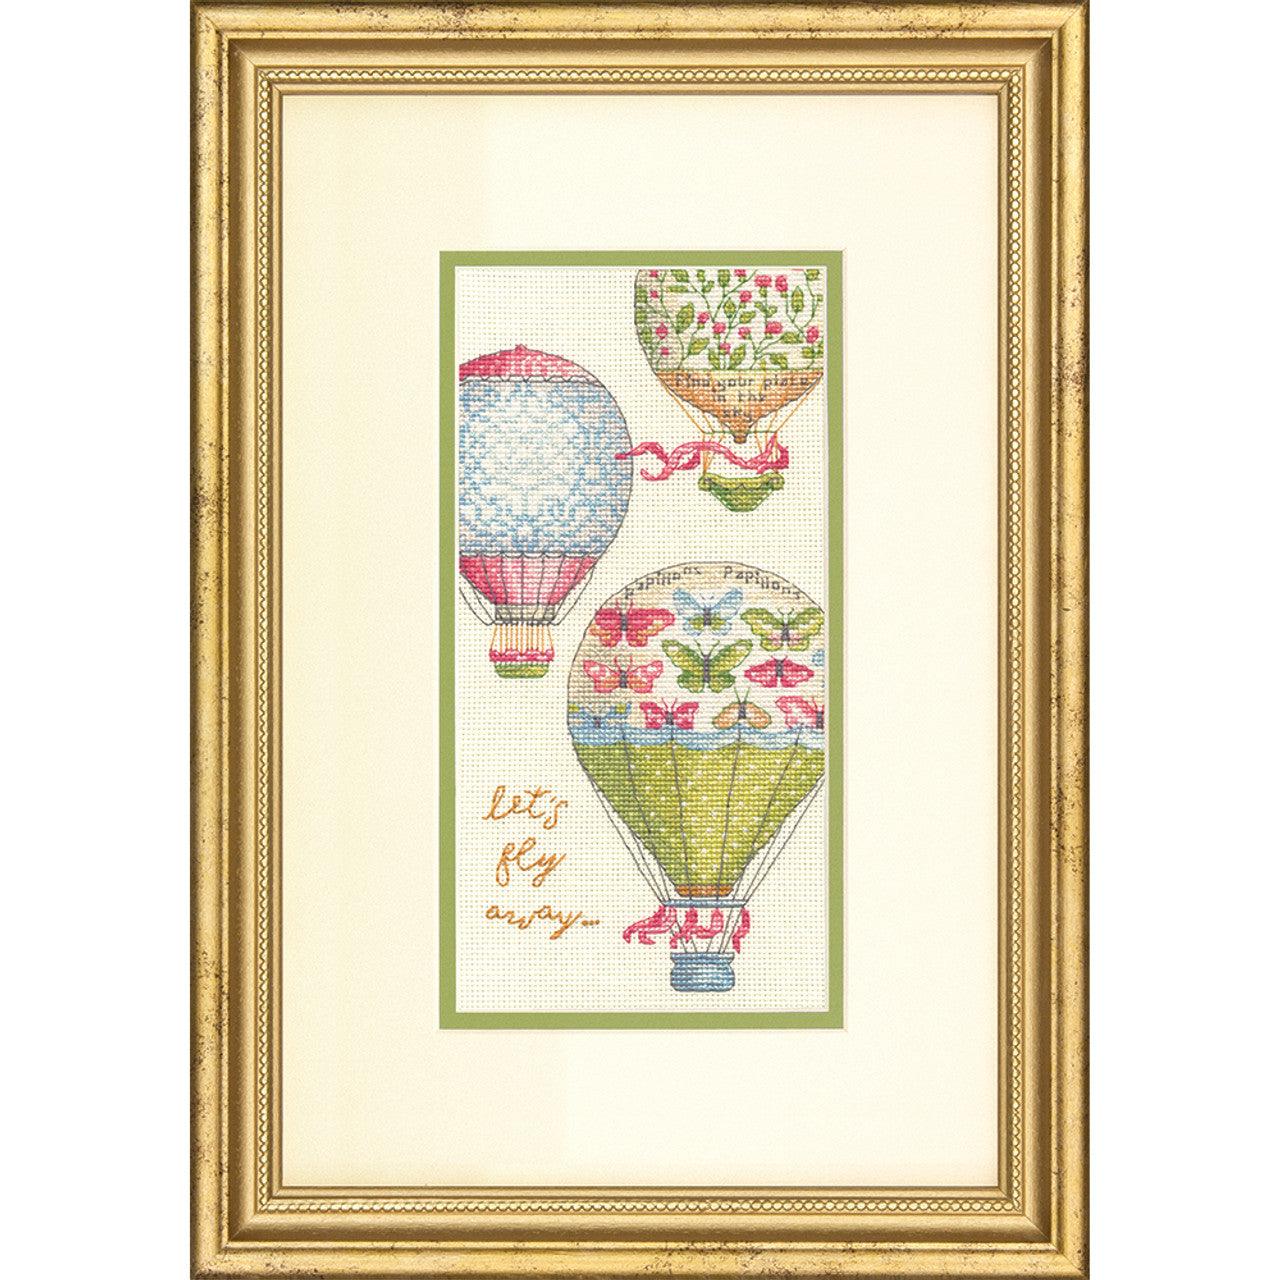 LET'S FLY AWAY, Counted Cross Stitch Kit, 18 count ivory Aida, DIMENSIONS (70-65181) - Leo Hobby